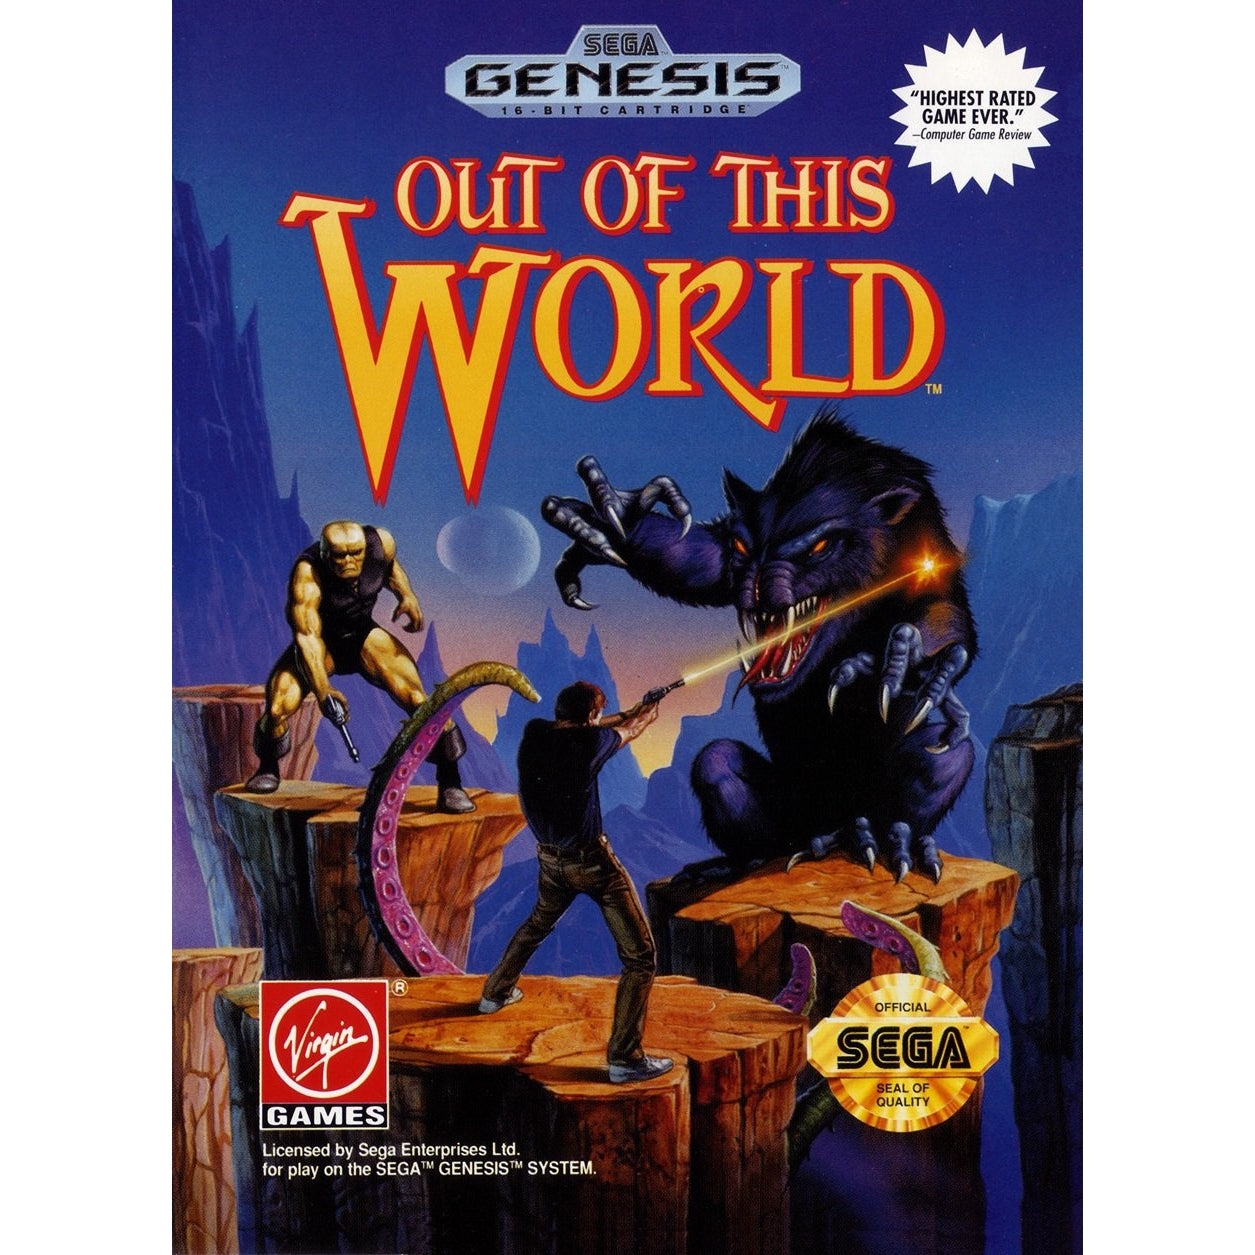 Out of This World - Sega Genesis Game Complete - YourGamingShop.com - Buy, Sell, Trade Video Games Online. 120 Day Warranty. Satisfaction Guaranteed.